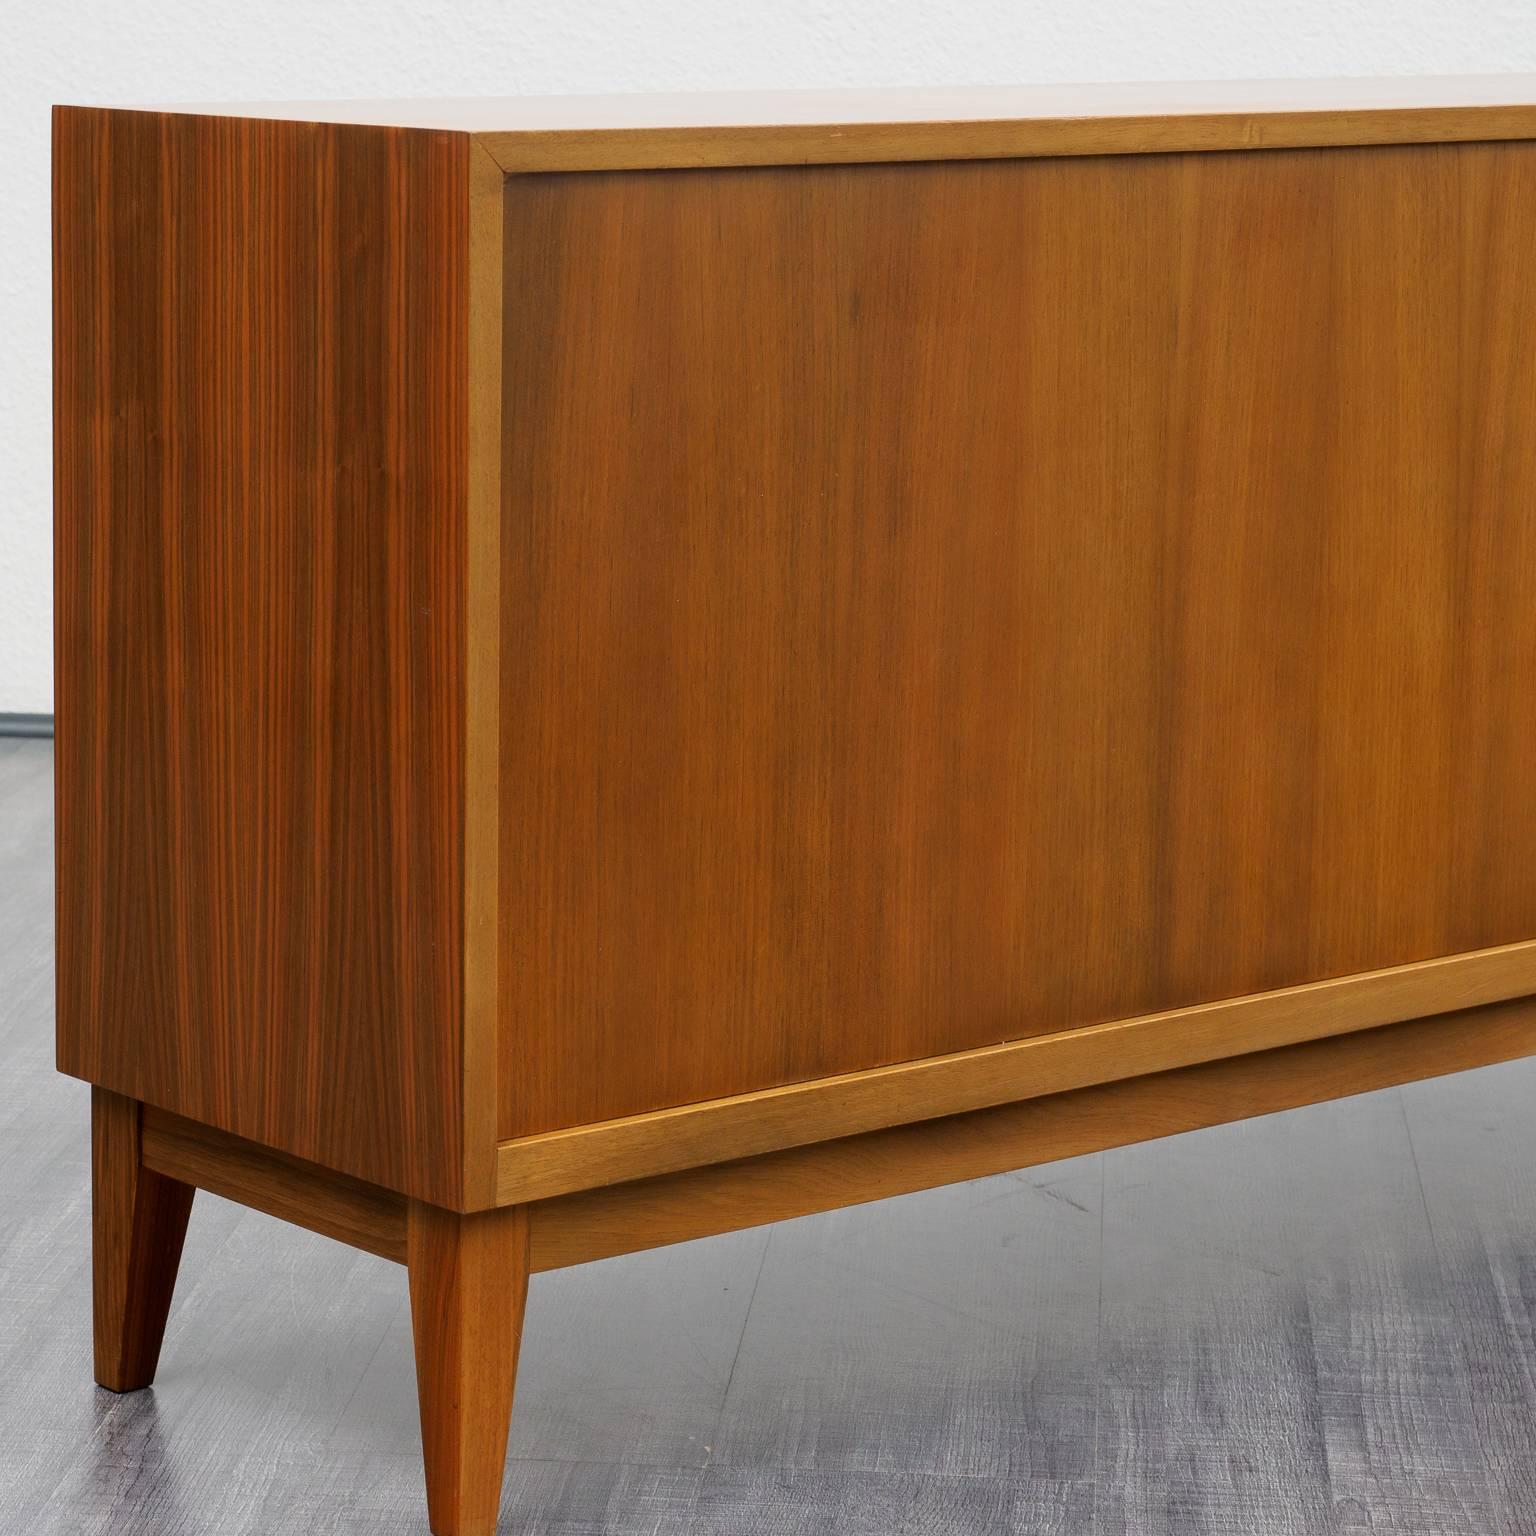 Slim sideboard from the 1950s. Design by Georg Satink for WK Möbel, 1952. Walnut veneer. High-quality workmanship, sliding doors with nice handles.

The top has been stored by the cabinet maker. Very good condition with small traces of usage.